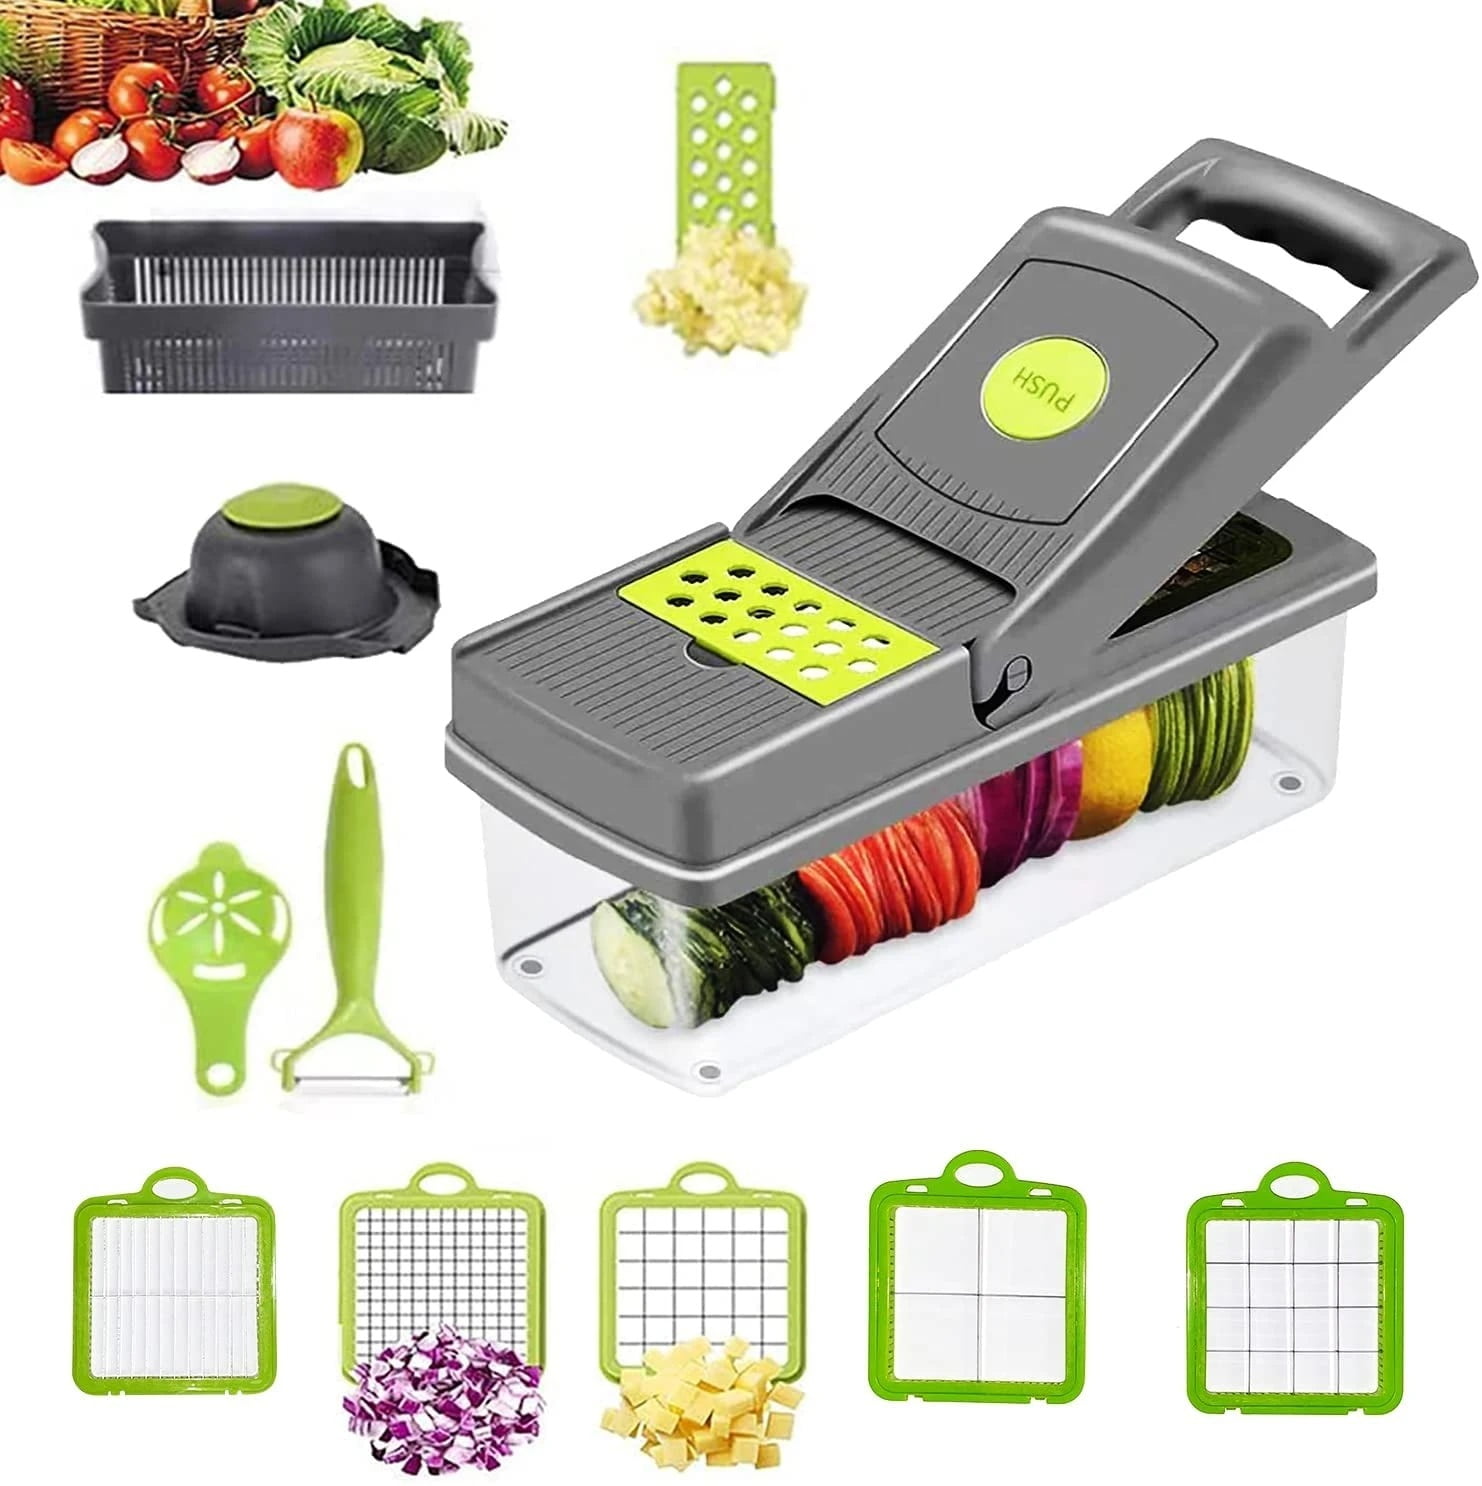 5 Core Vegetable 8 in 1 Food Veggie Slicer Dicer for Onion Potato Cucumber with Container - Walmart.com